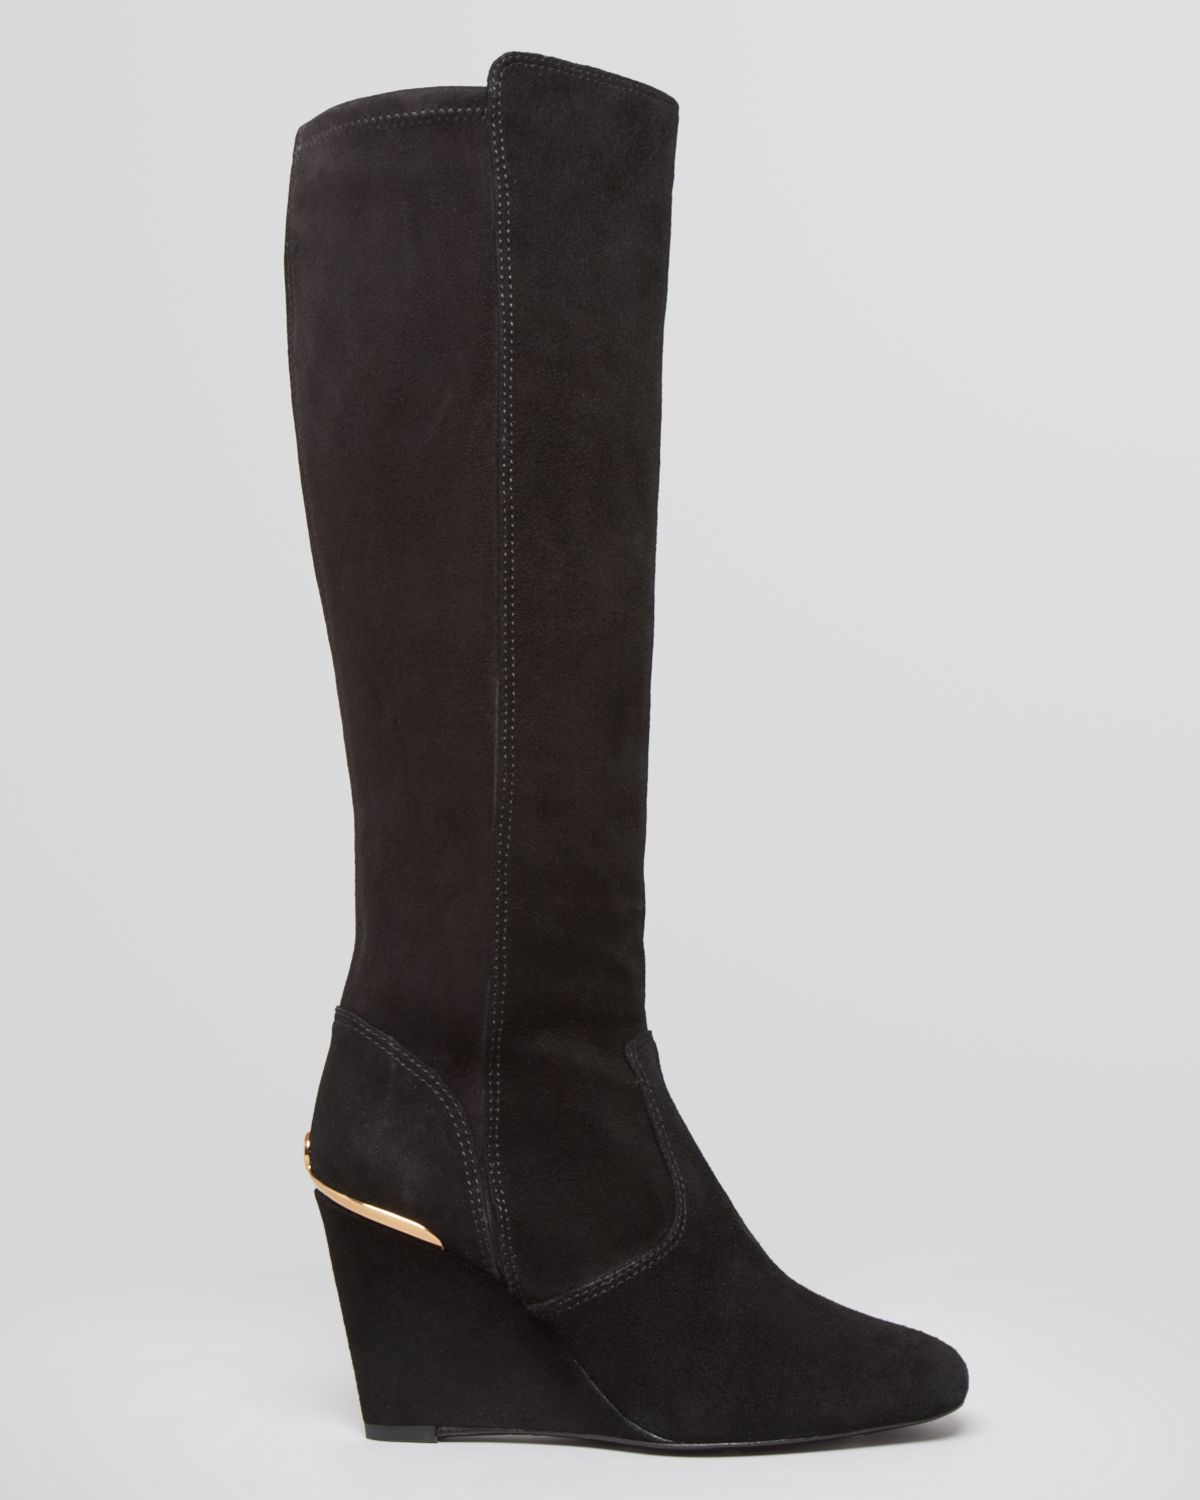 Tory Burch Tall Wedge Boots Hendin in Black - Lyst